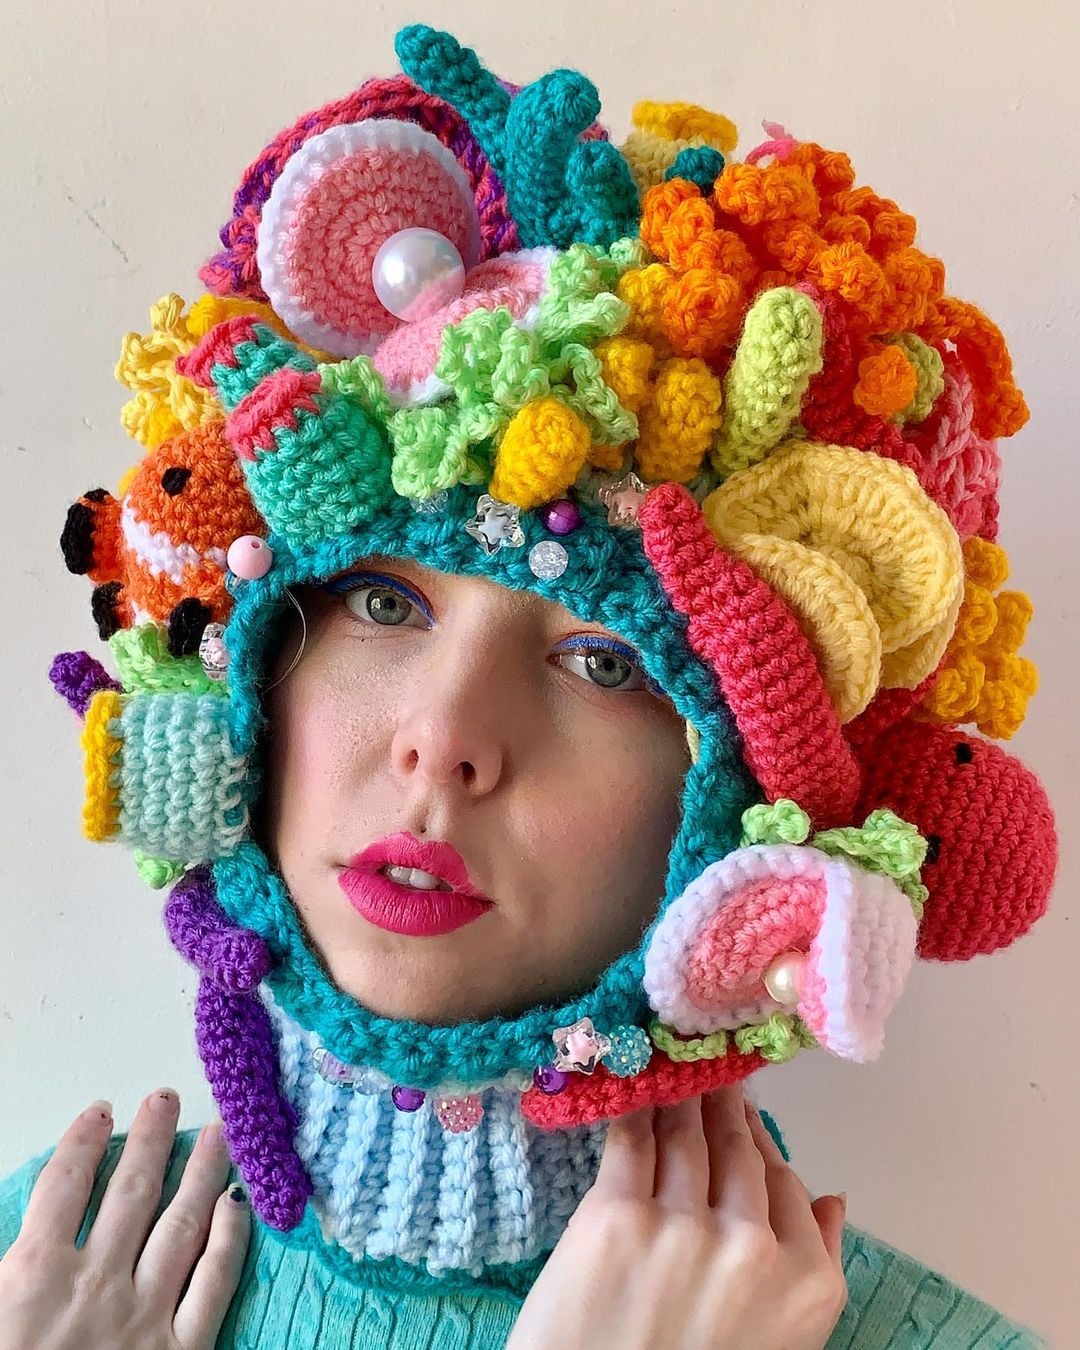 These colourful crochet garments will boost your serotonin!